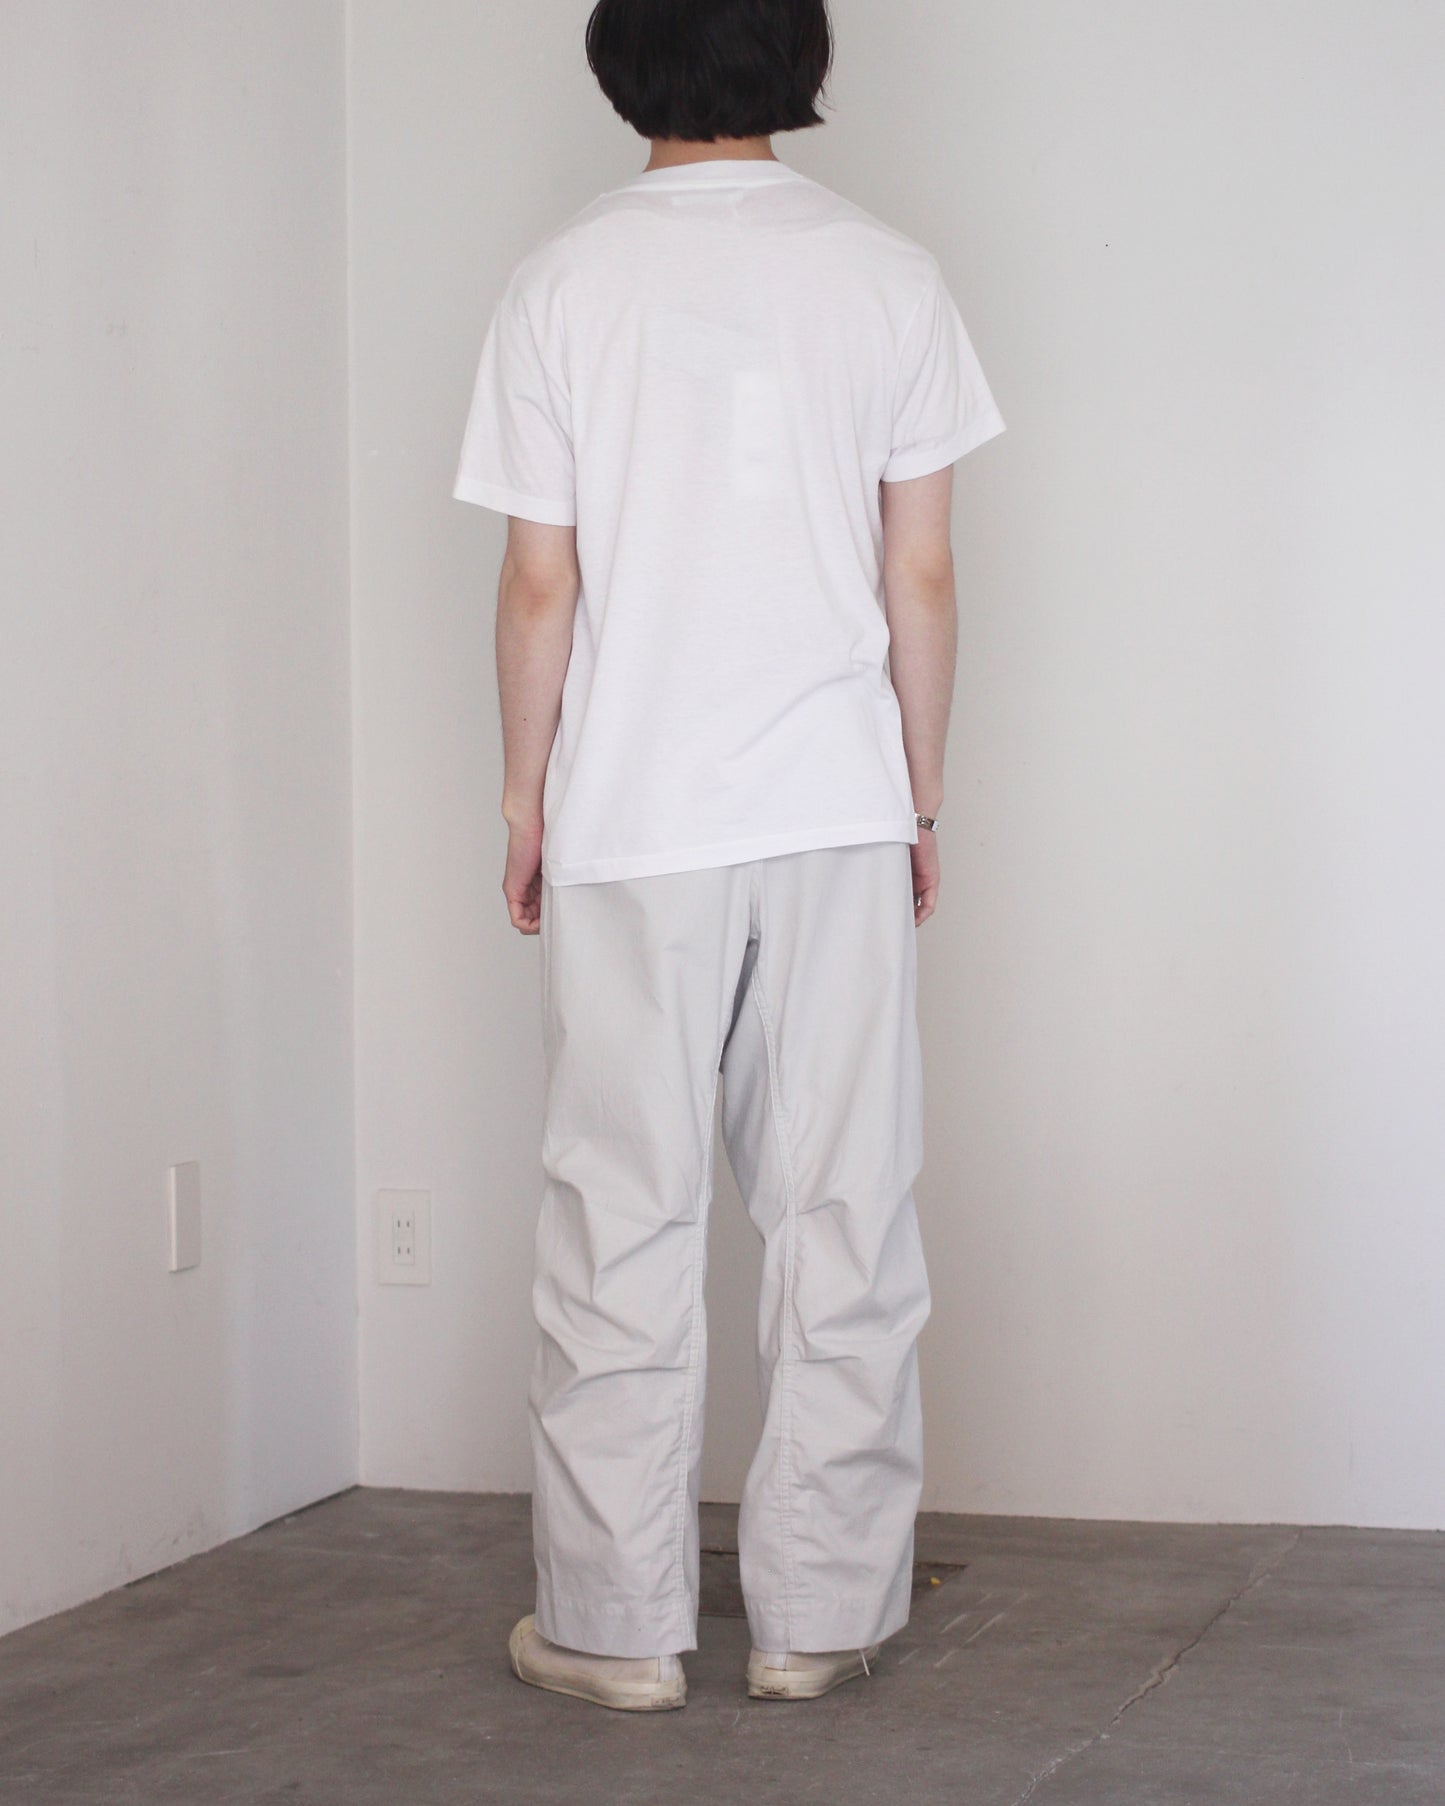 seven by seven（セブンバイセブン）REWORK EMBROIDERY TEE "assort①"